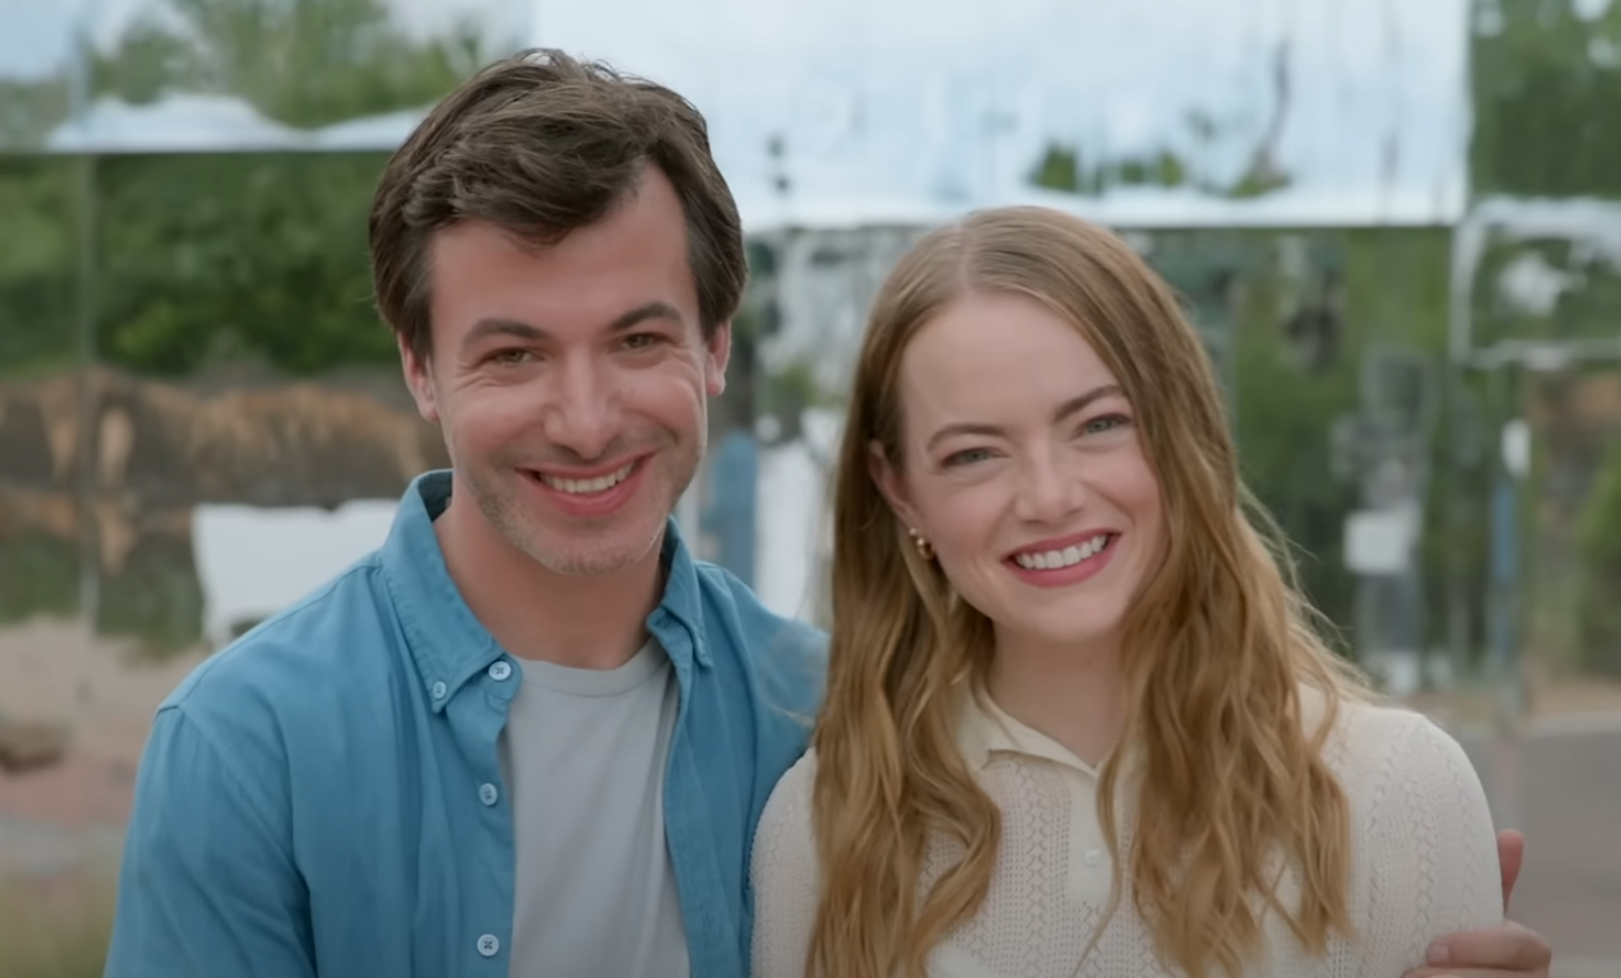 A screen shot of The Curse, featuring emma stone and nathan fielder smiling way too big into the camera